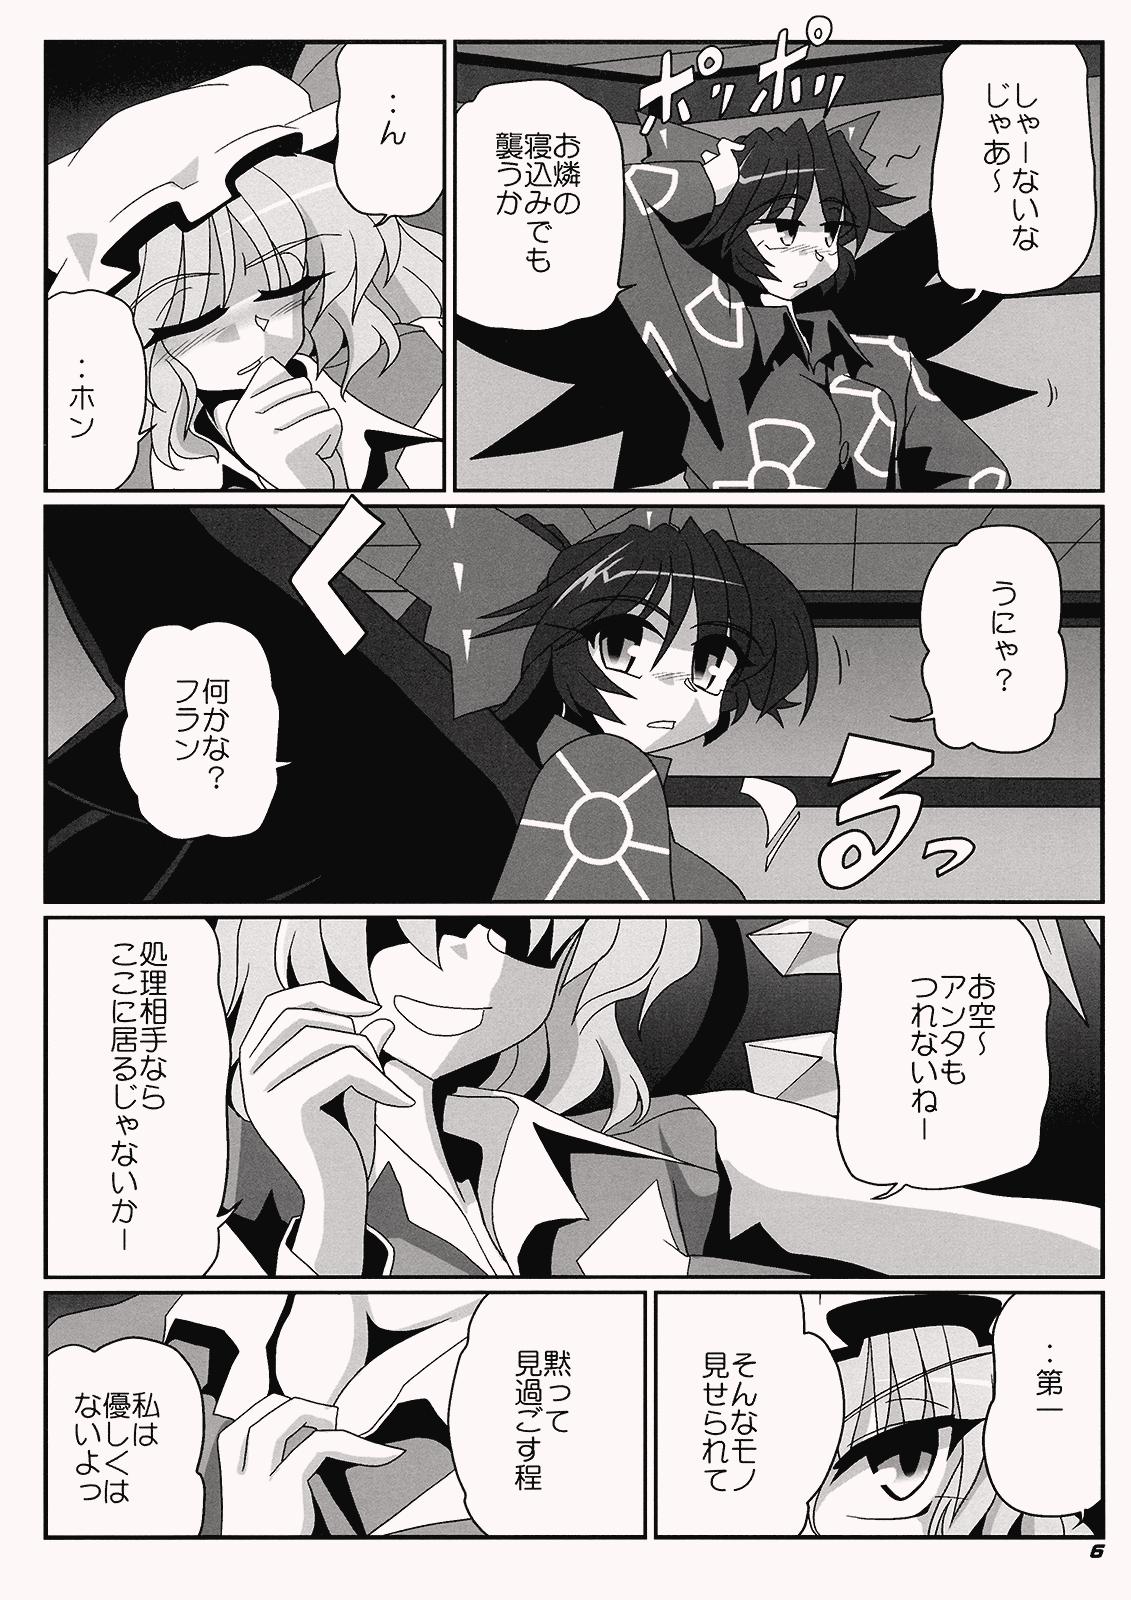 Small Tits Porn TOHO N+ QF - Touhou project Orgasms - Page 8